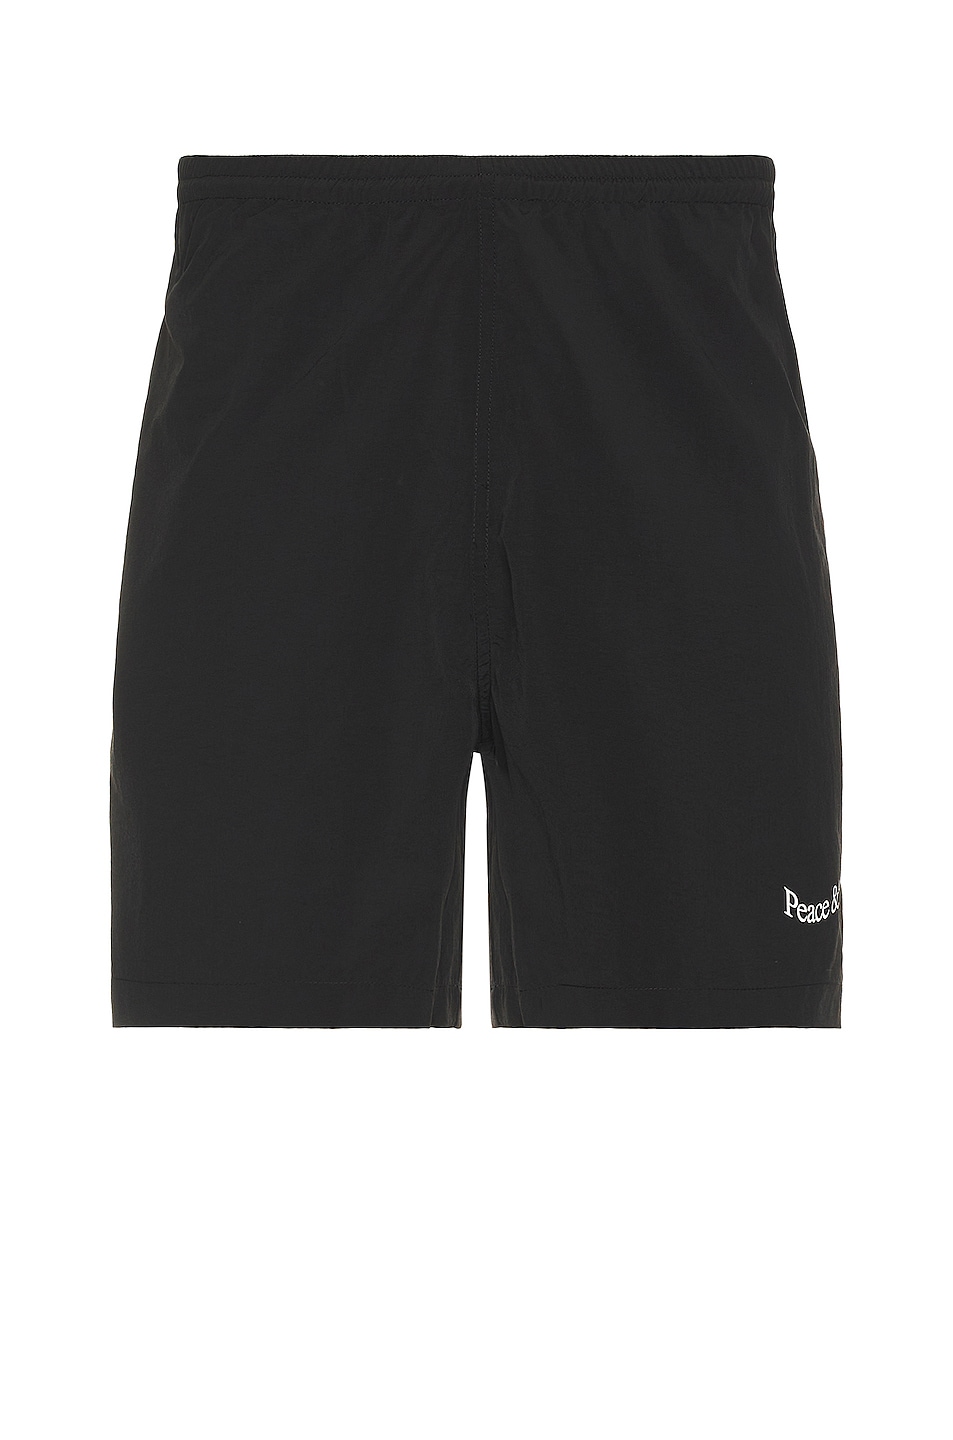 Image 1 of Museum of Peace and Quiet Workmark 5" Shorts in Black